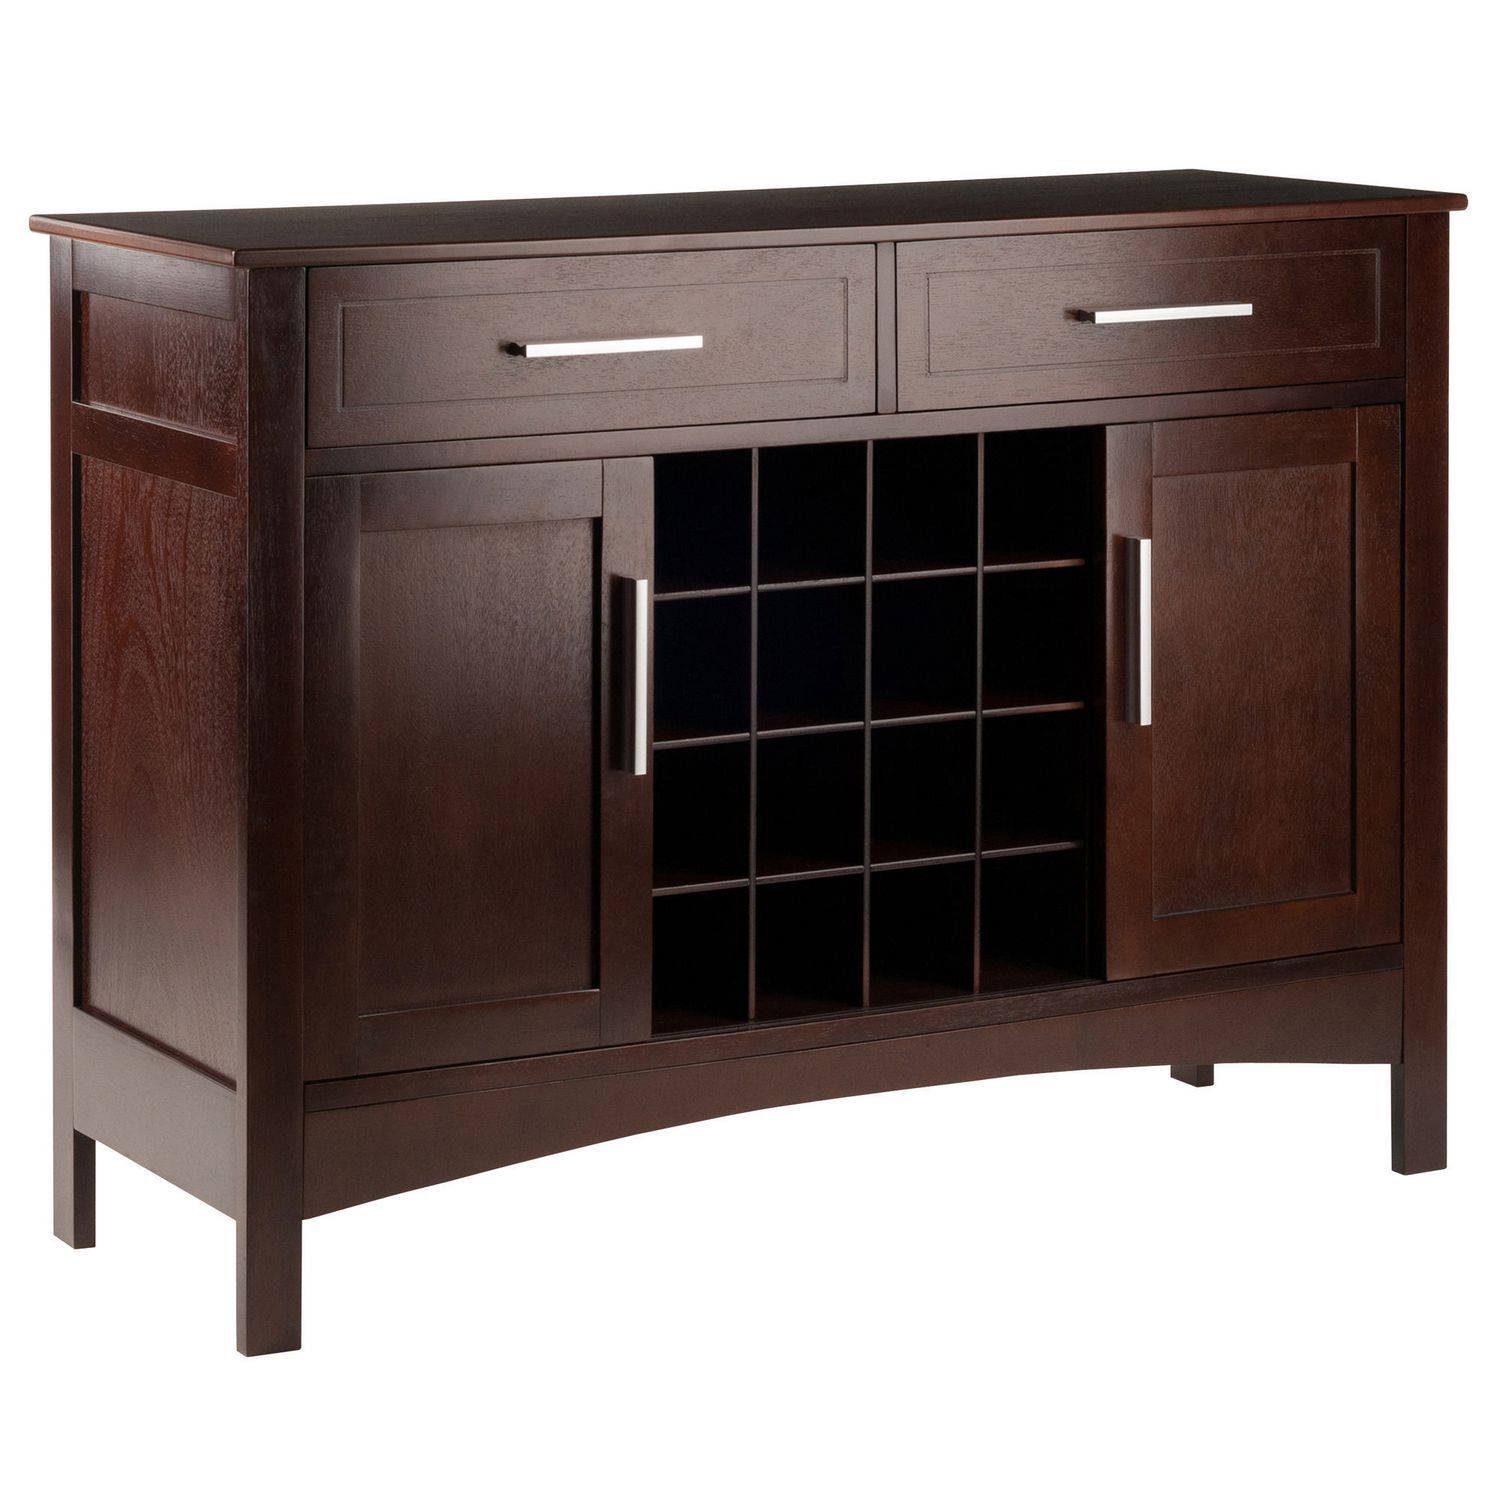 Winsome Gordon Buffet Cabinet/sideboard Cappuccino Finish Intended For Modern Cappuccino Open Storage Dining Buffets (View 22 of 30)